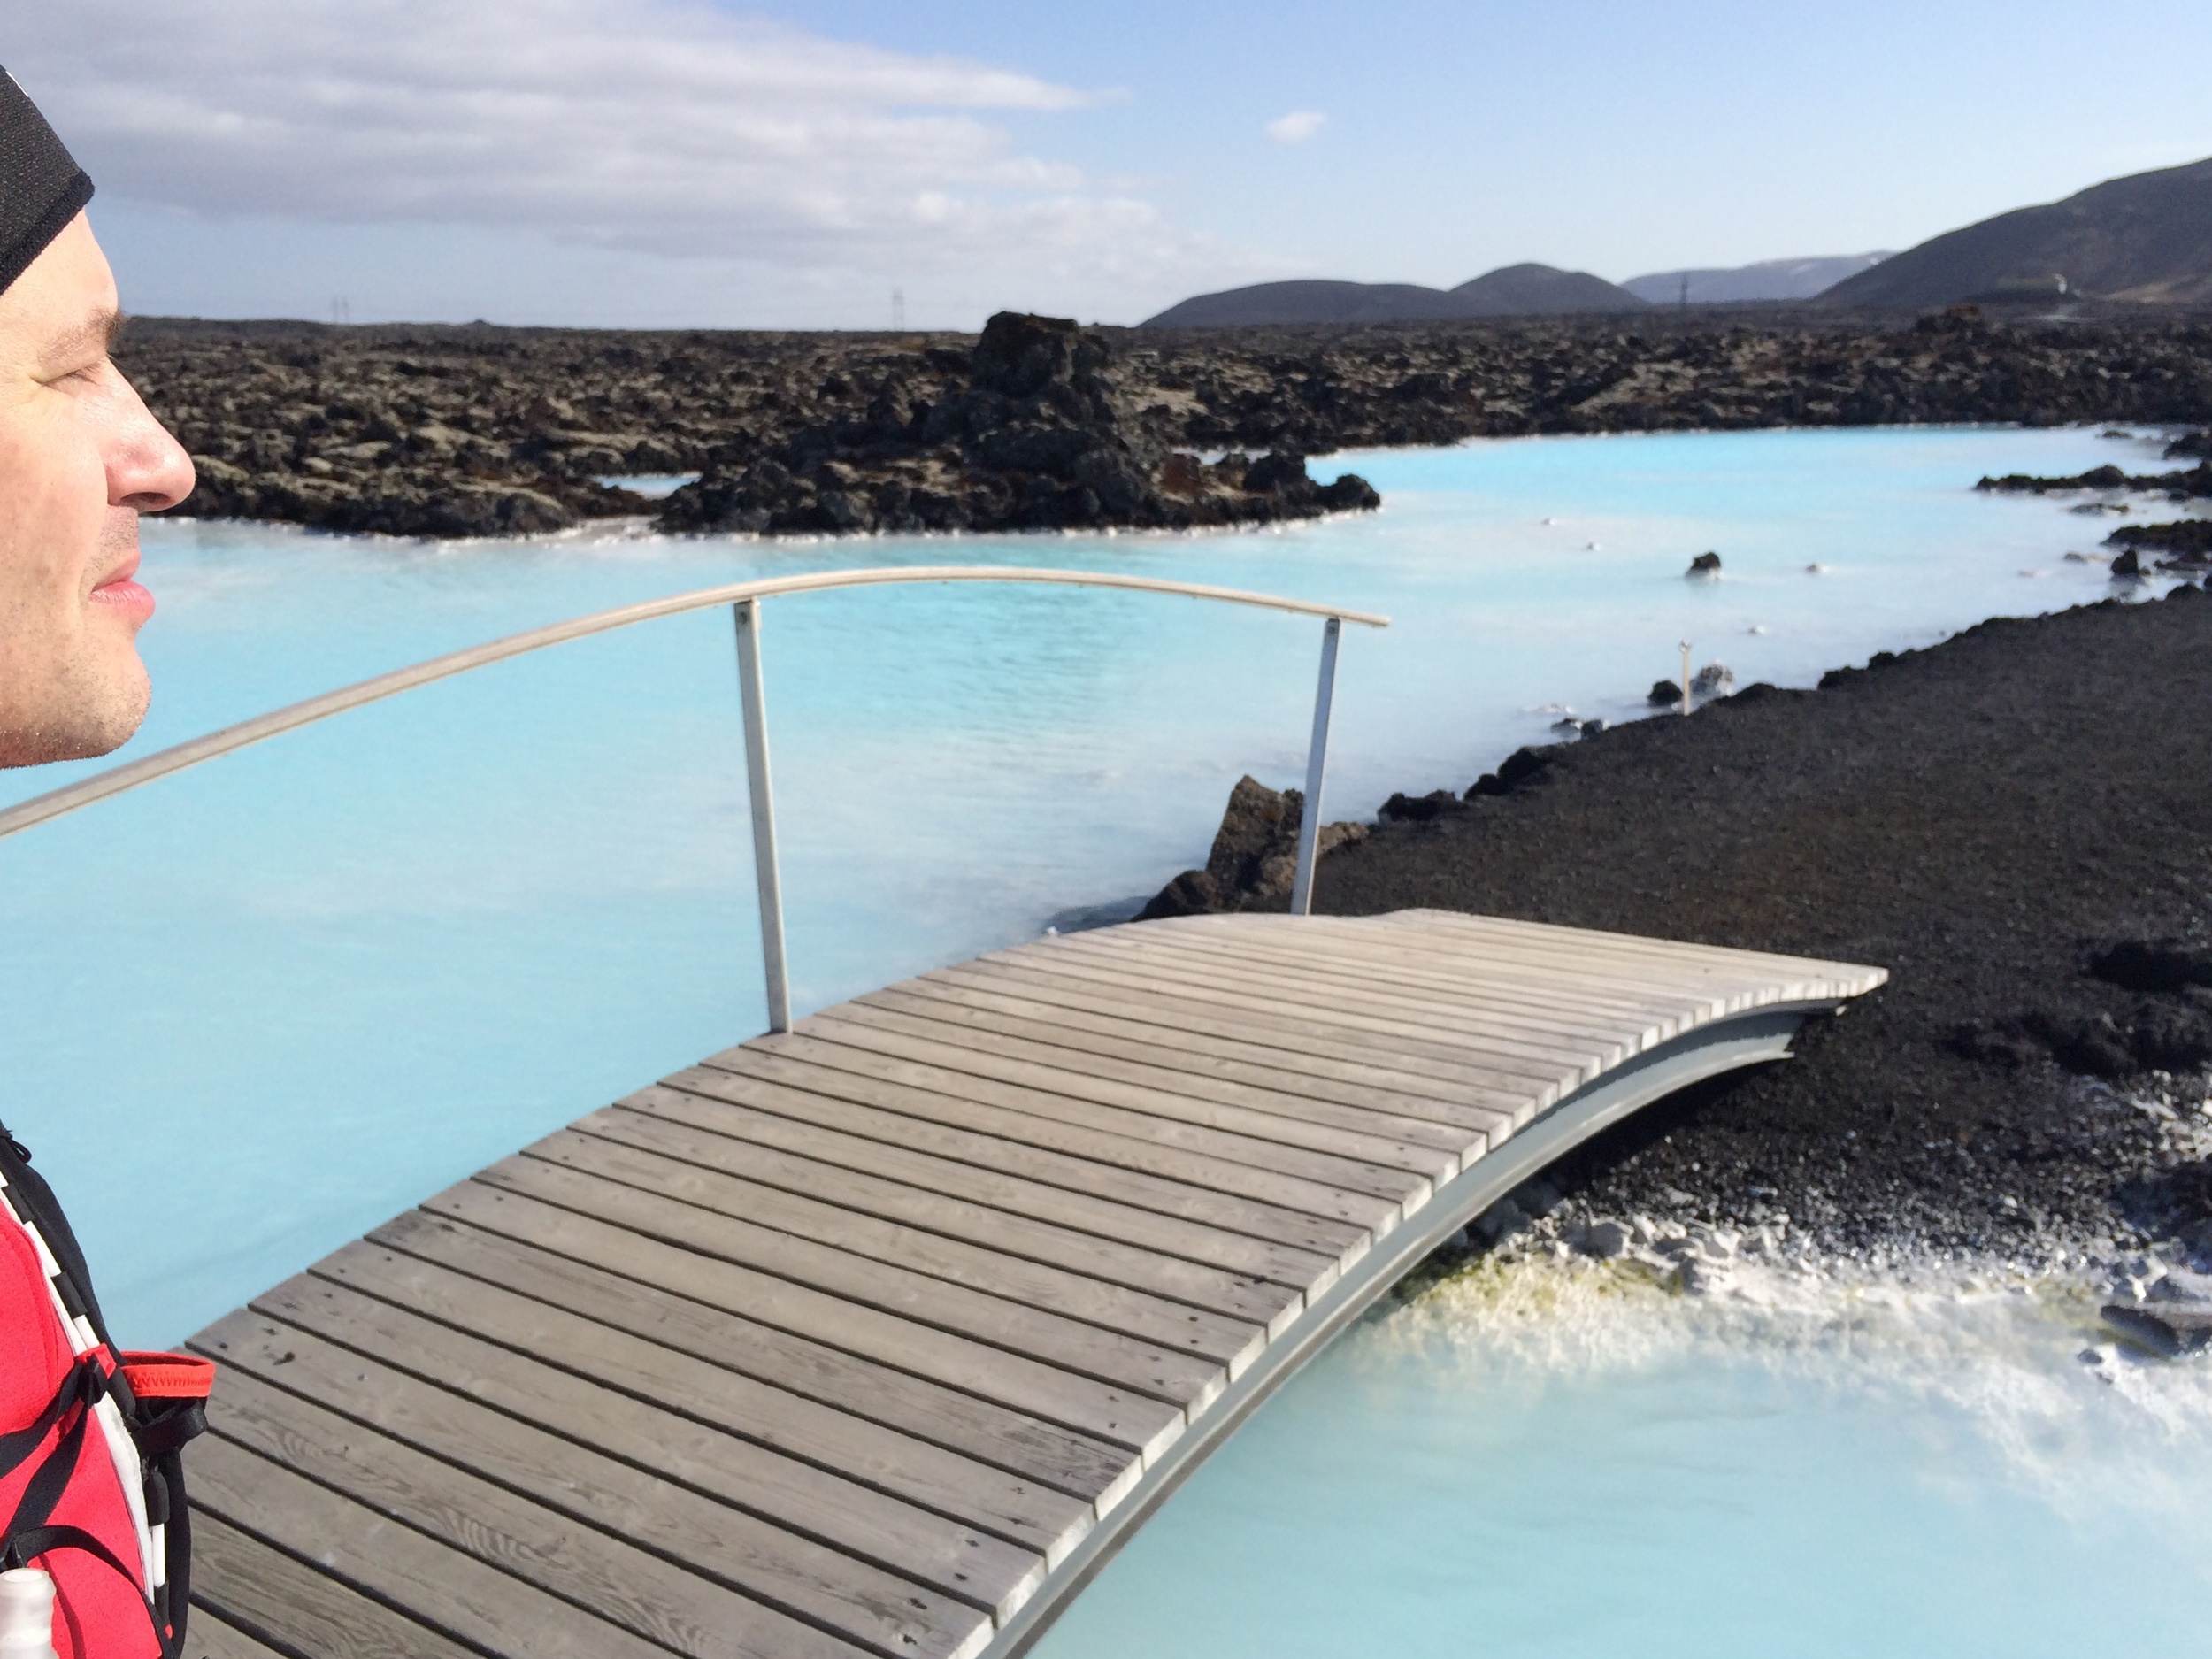 Enjoying the view by the Blue Lagoon